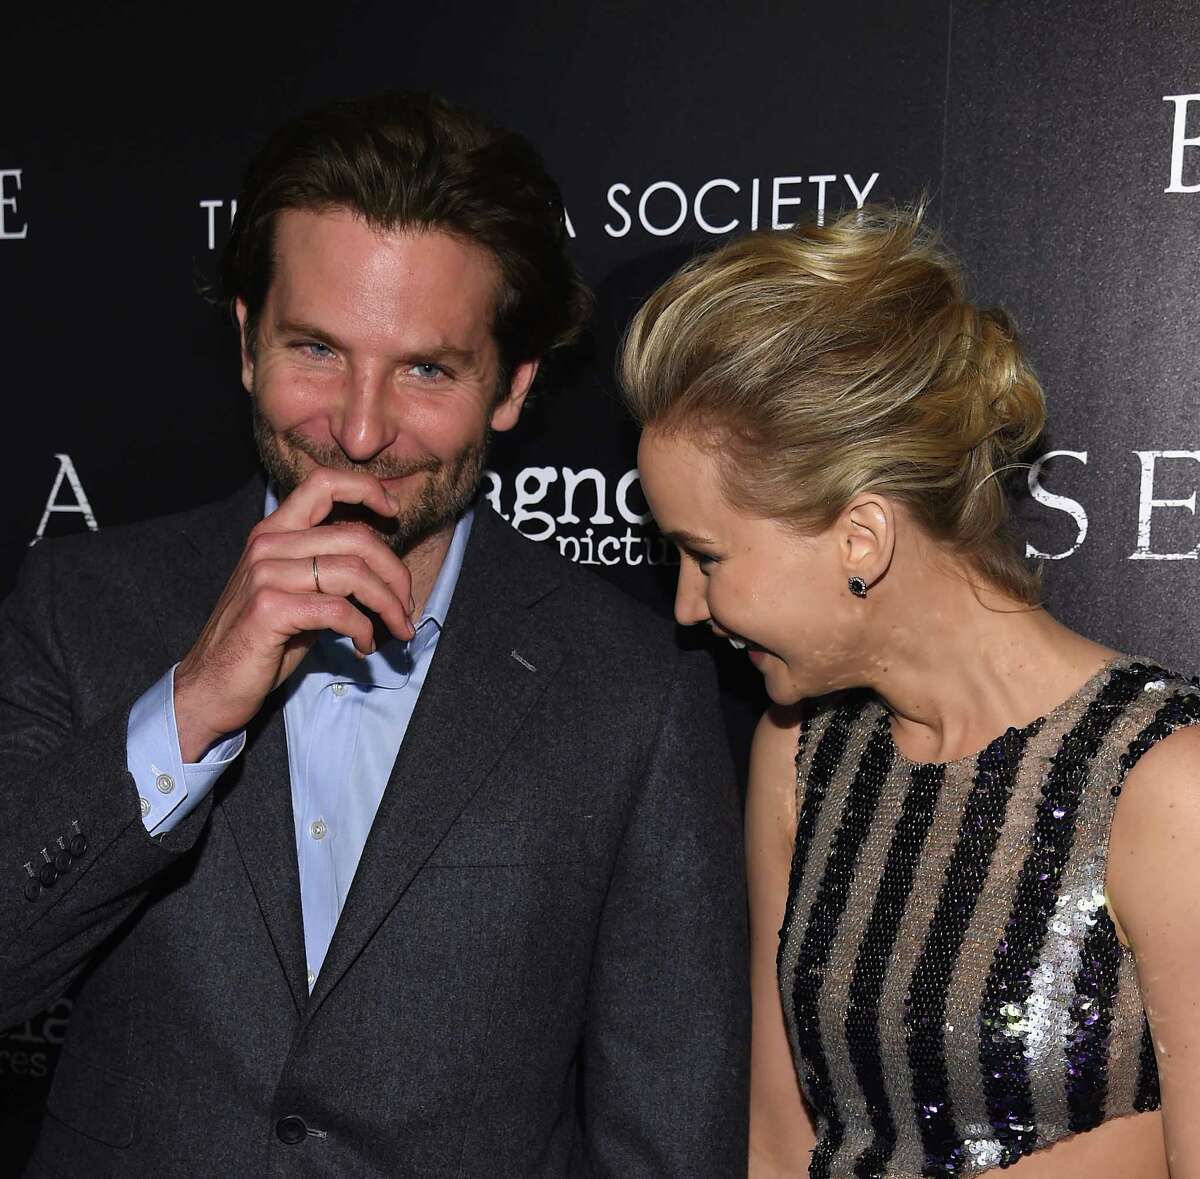 Bradley Cooper and Jennifer Lawrence No wonder they pair so well together on the screen. Their chemistry is amazing.